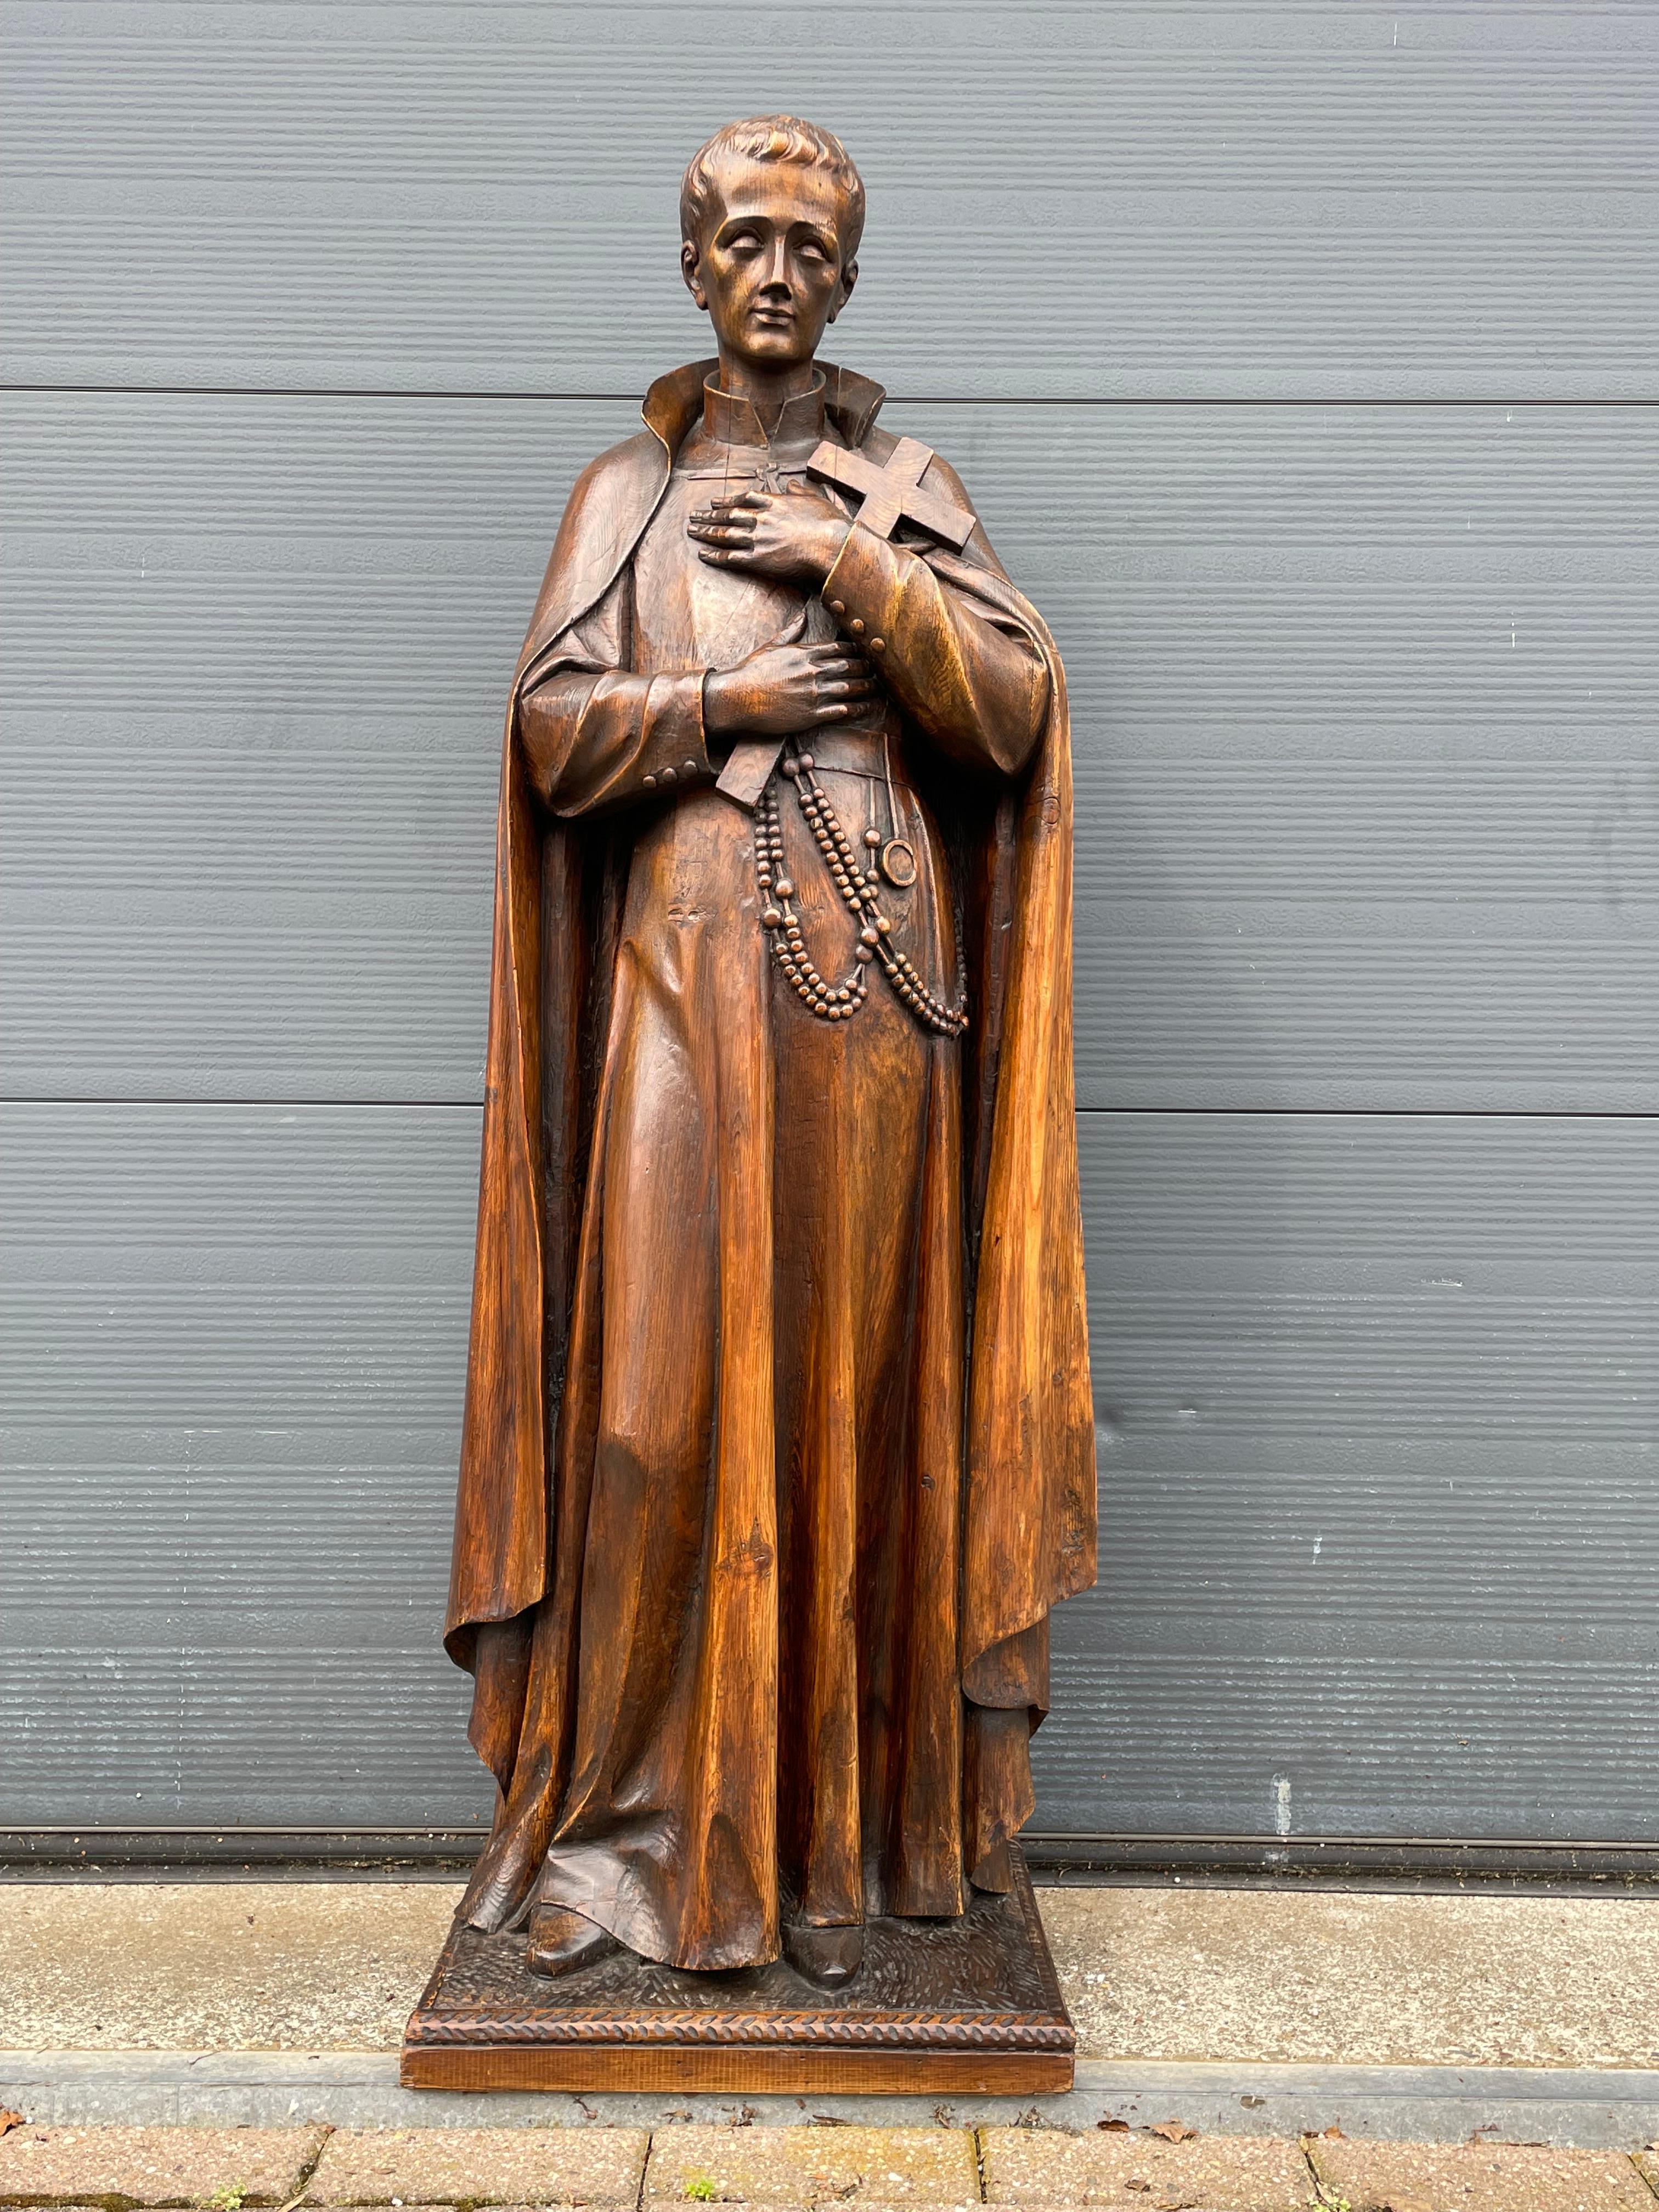 Unique hand carved church or monastery statue of Saint and former lay brother Gerard Majella.

Gerardo Maiella (6 April 1726 – 16 October 1755) was an Italian lay brother of the Congregation of the Redeemer, better known as the Redemptorists, who is